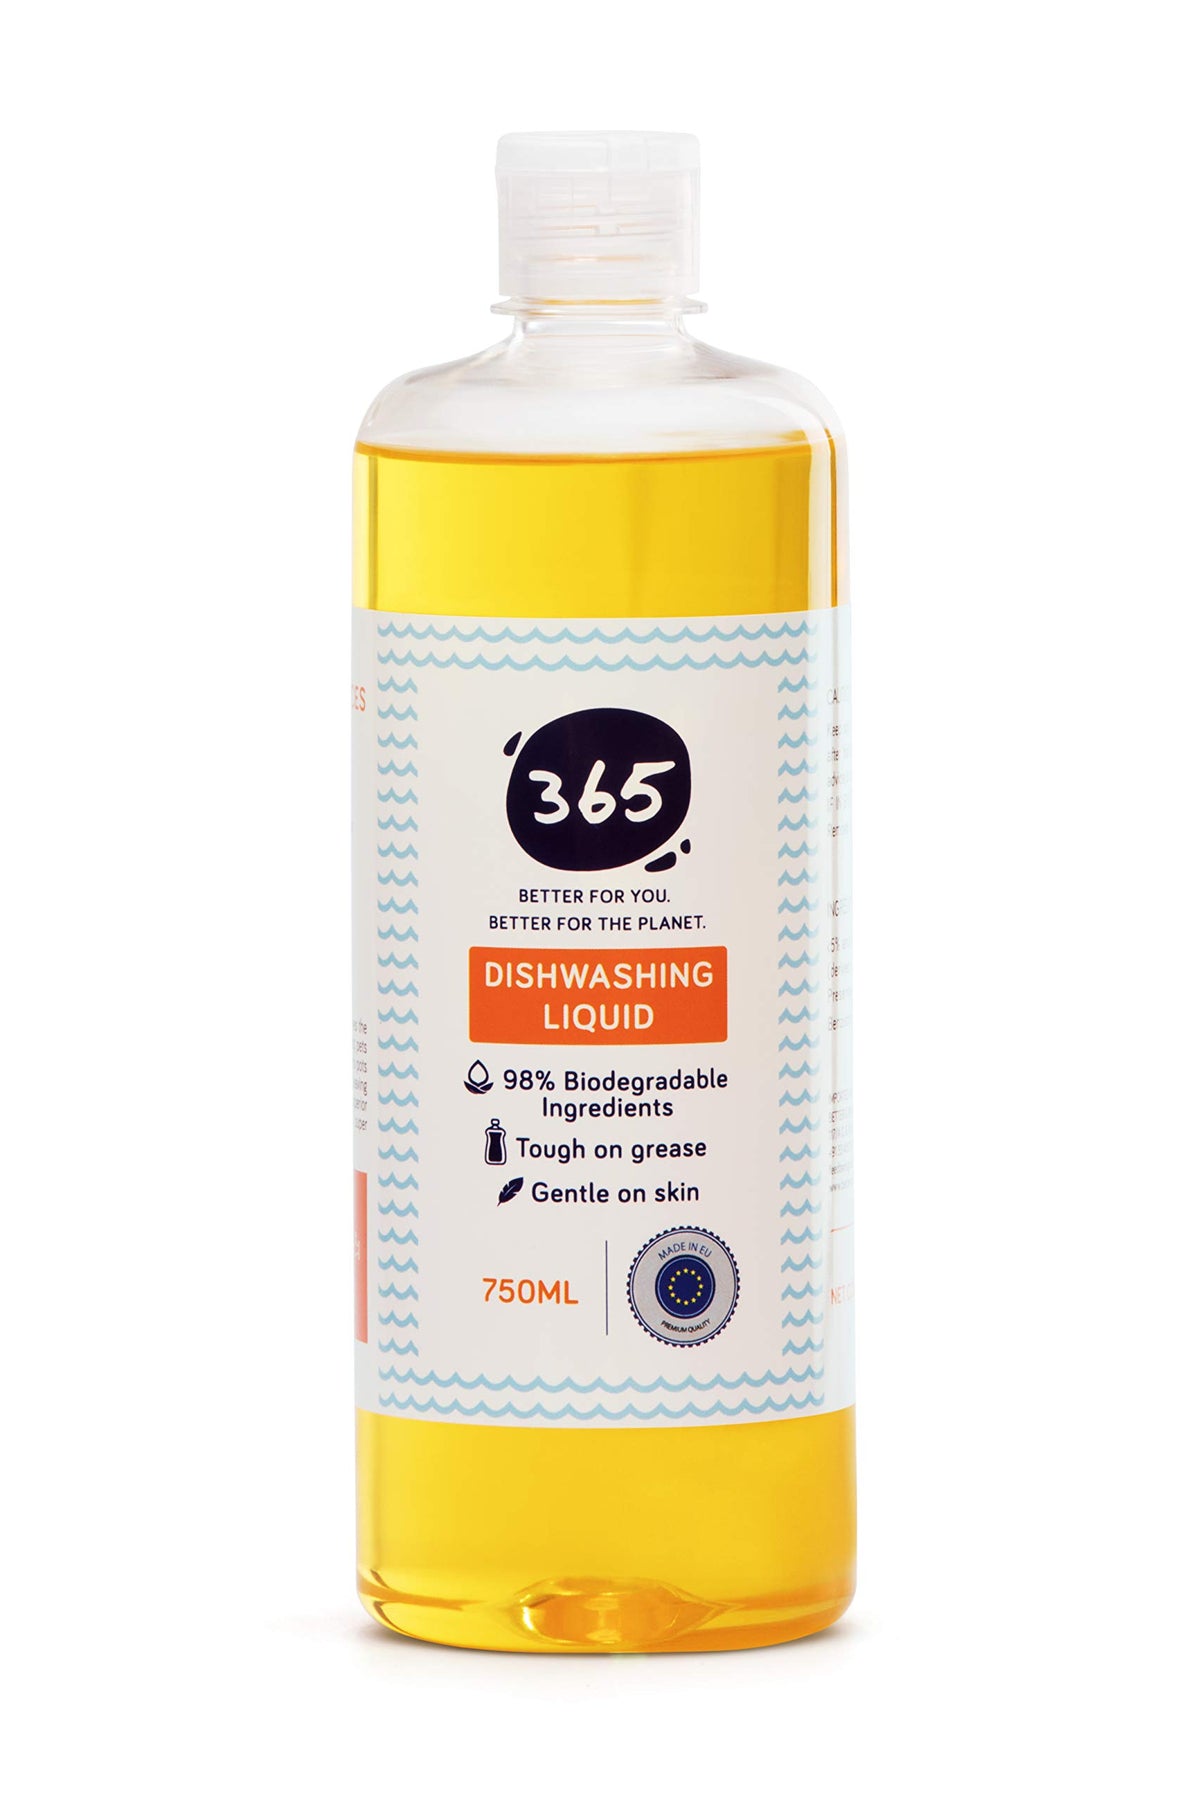 ABSORBIA 365 Dishwashing Liquid Gel with Lemon | 750 ml - Very Gentle on Skin Tough on Grease, Eco-Friendly, Biodegradable, Non-Toxic, made with Plant-Based ingredients